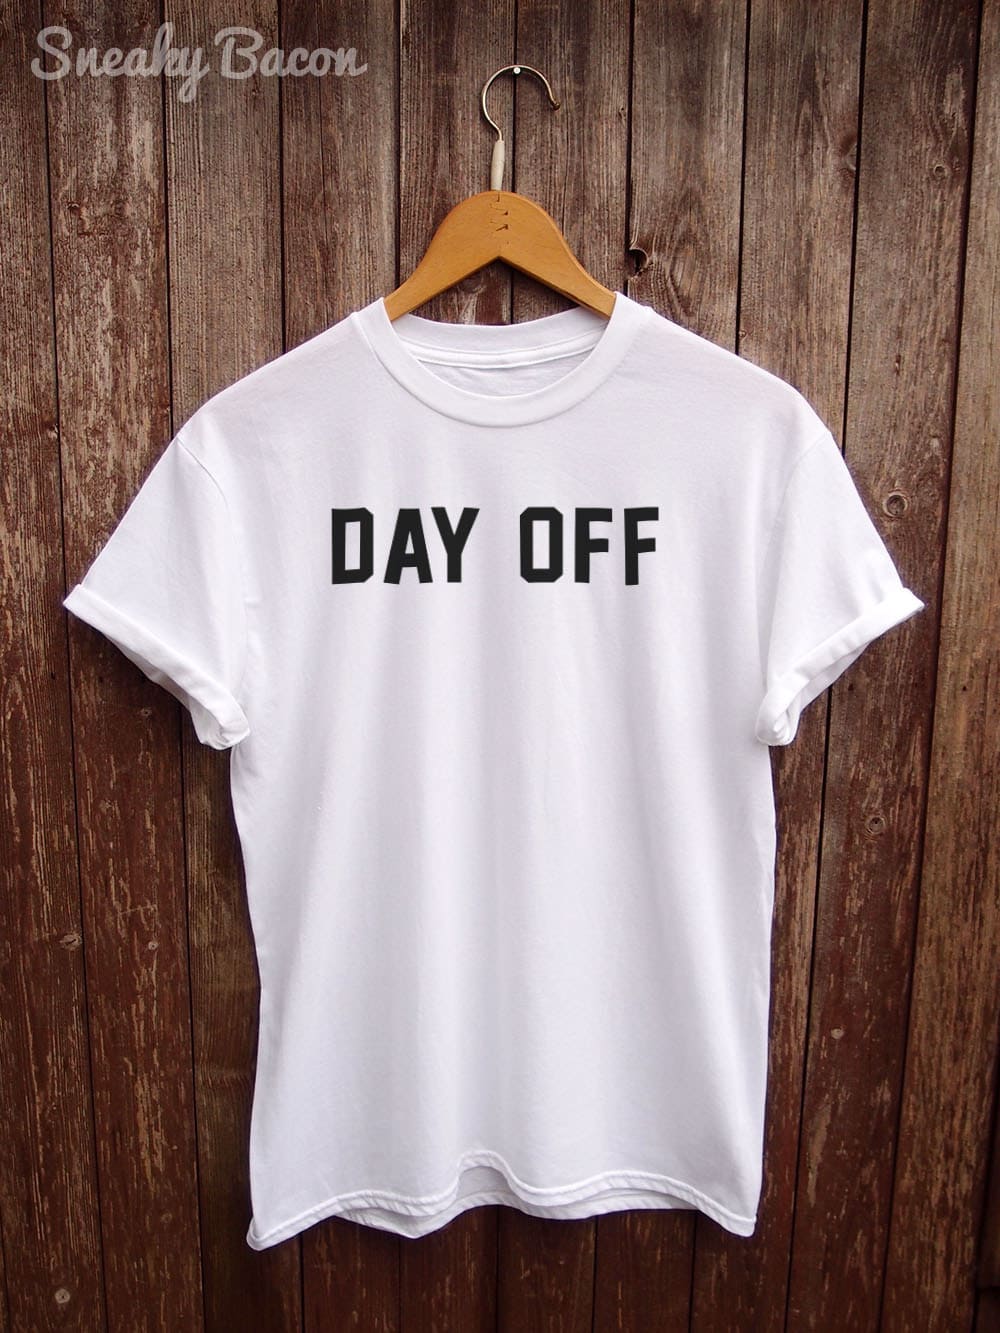 Day off t-shirt funny gifts for your employees